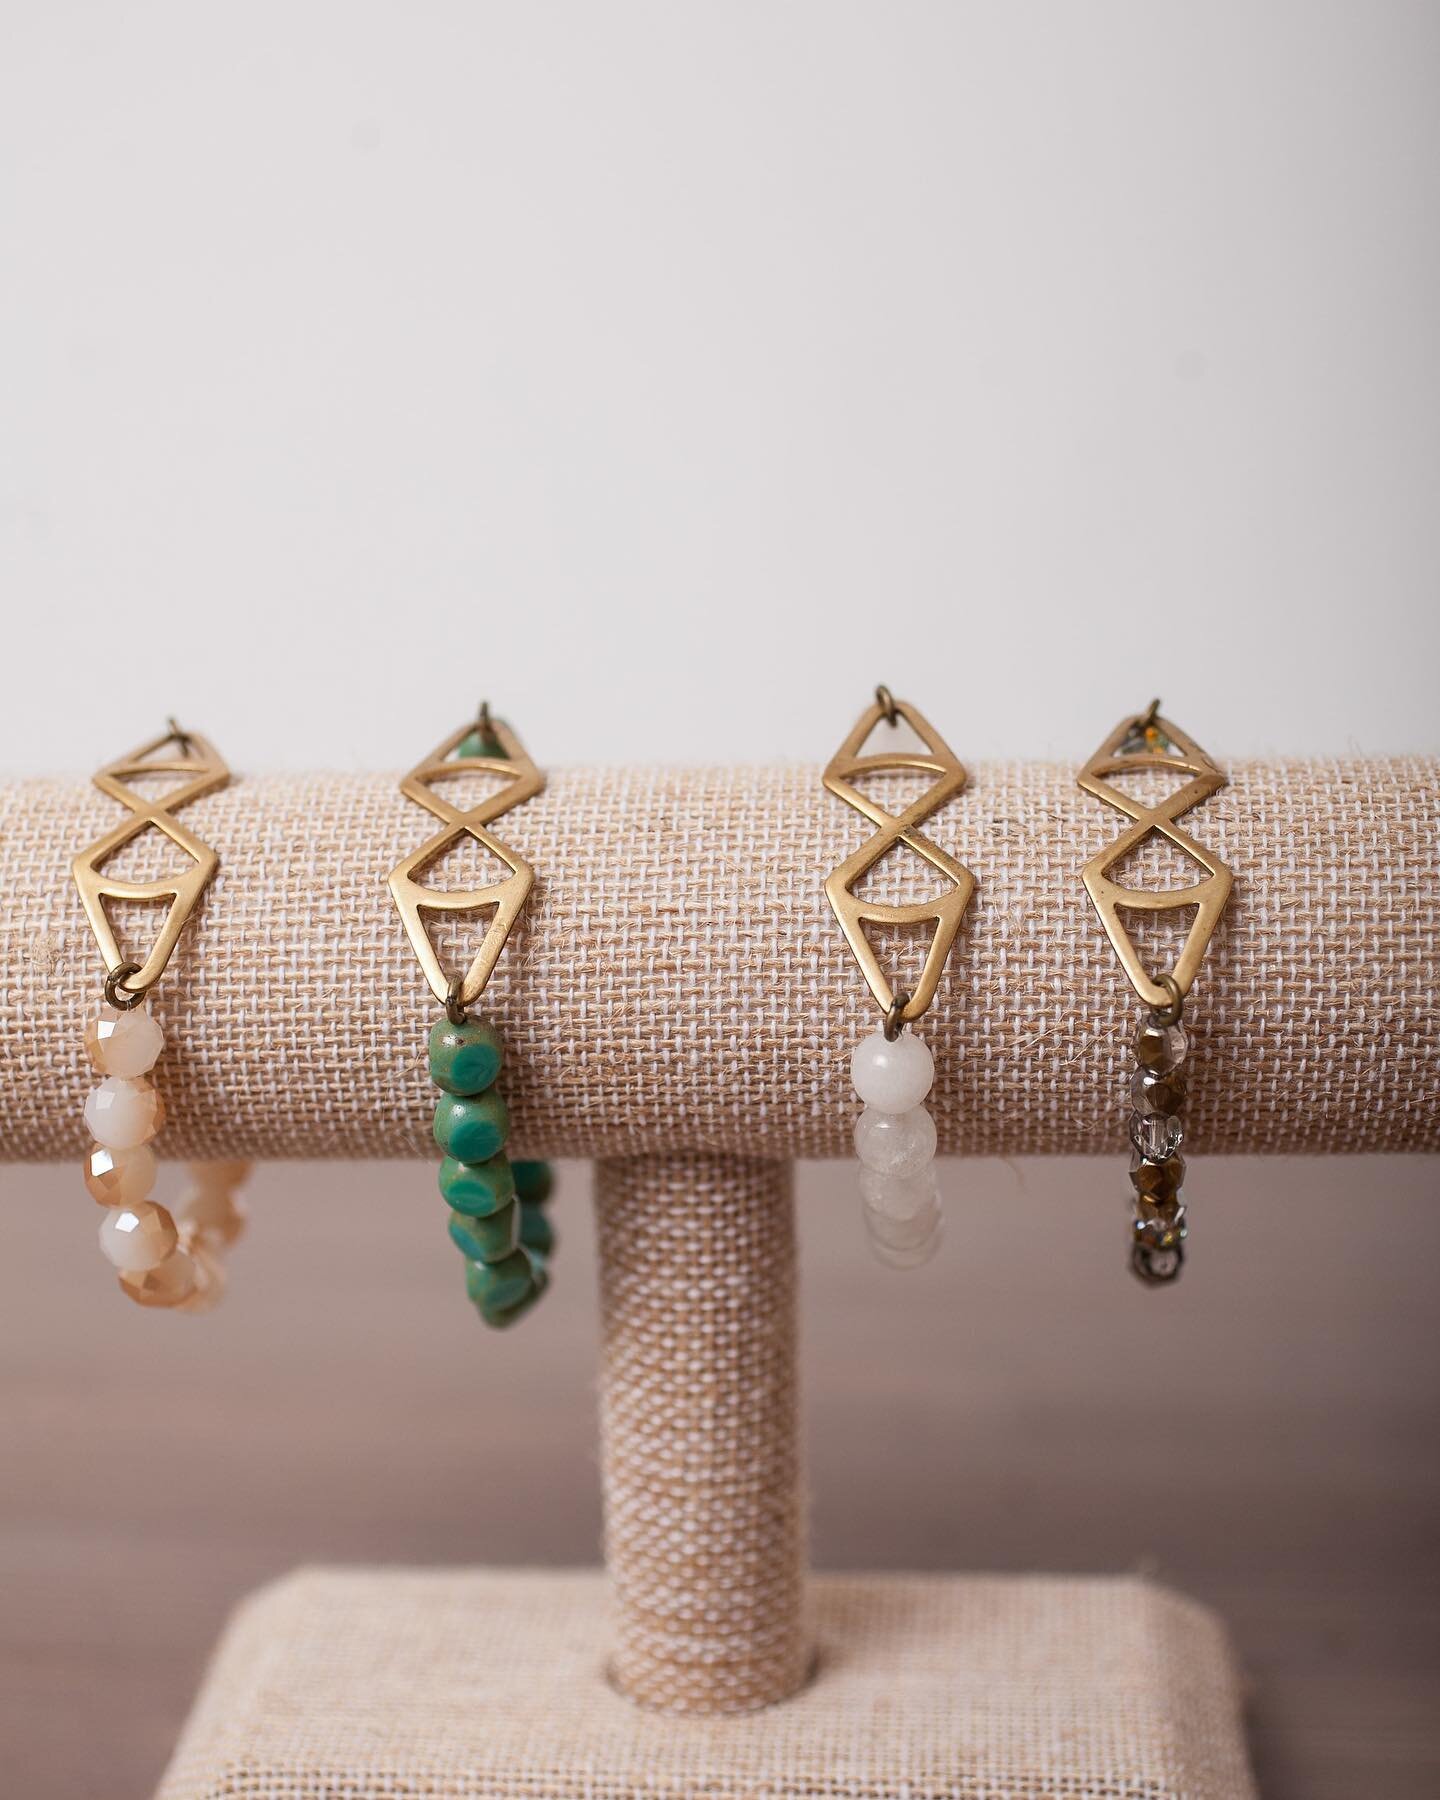 These bracelets make a statement alone, or worn with a simple gold bracelet.  How would you wear it?